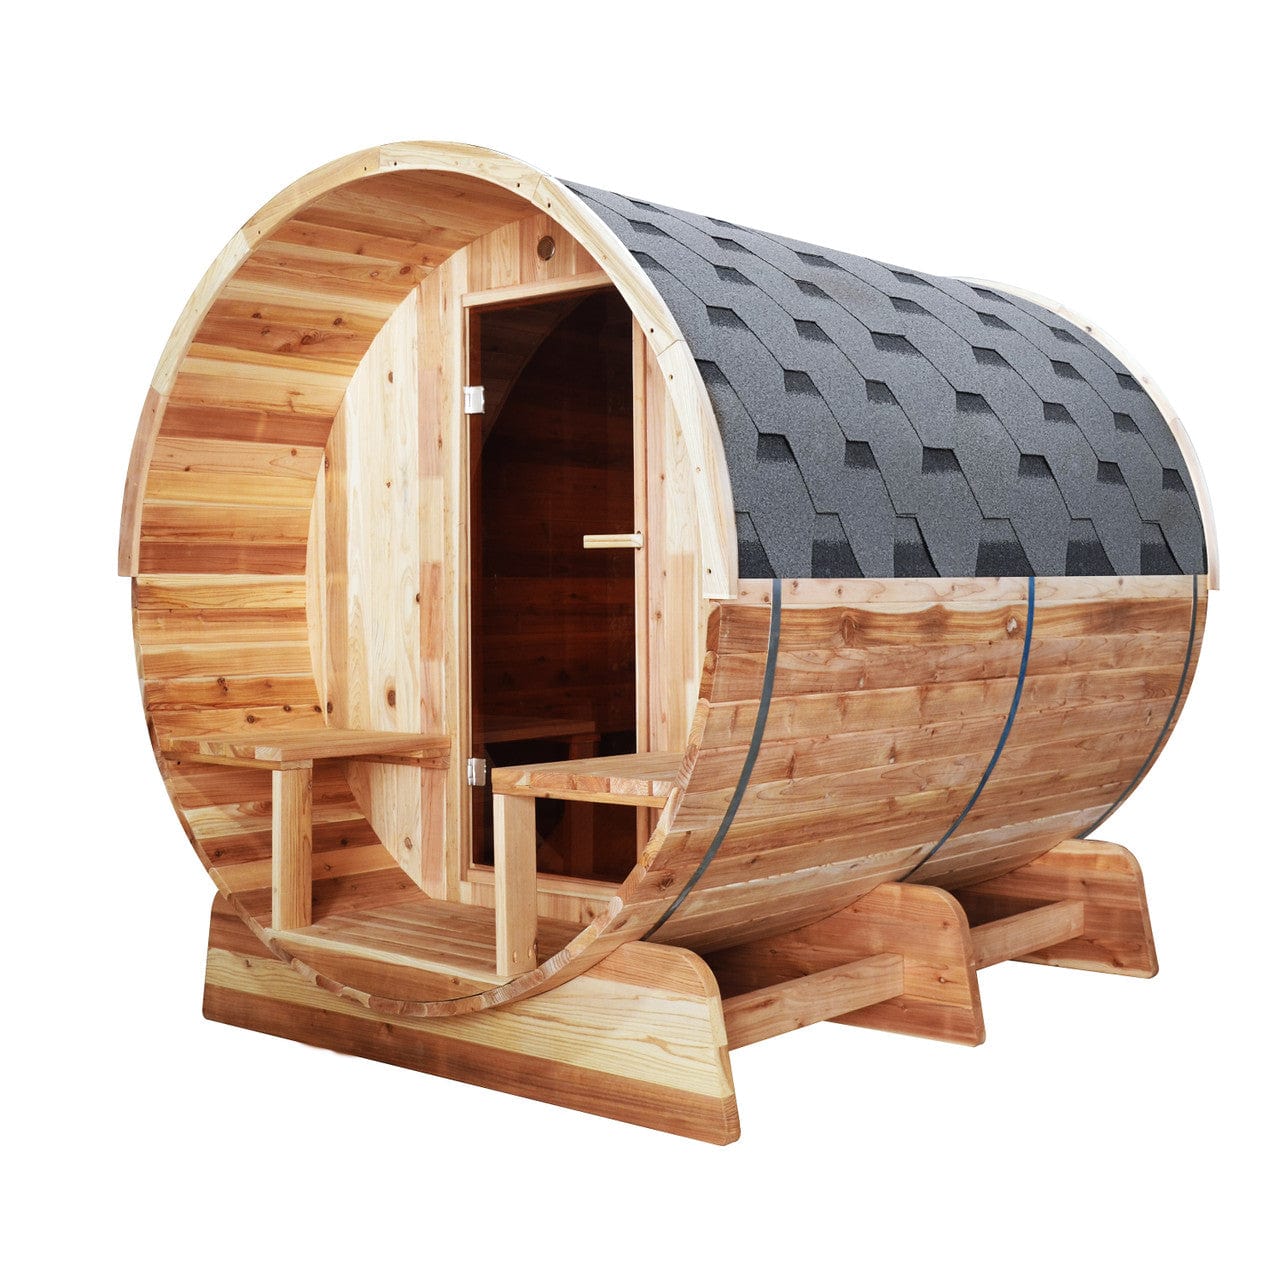 Aleko SB8CEDARCP-AP Outdoor / Indoor Red Cedar Wet/Dry 6-8 Person Barrel Sauna - with Front Porch Canopy, Panoramic View, and Bitumen Shingle Roofing